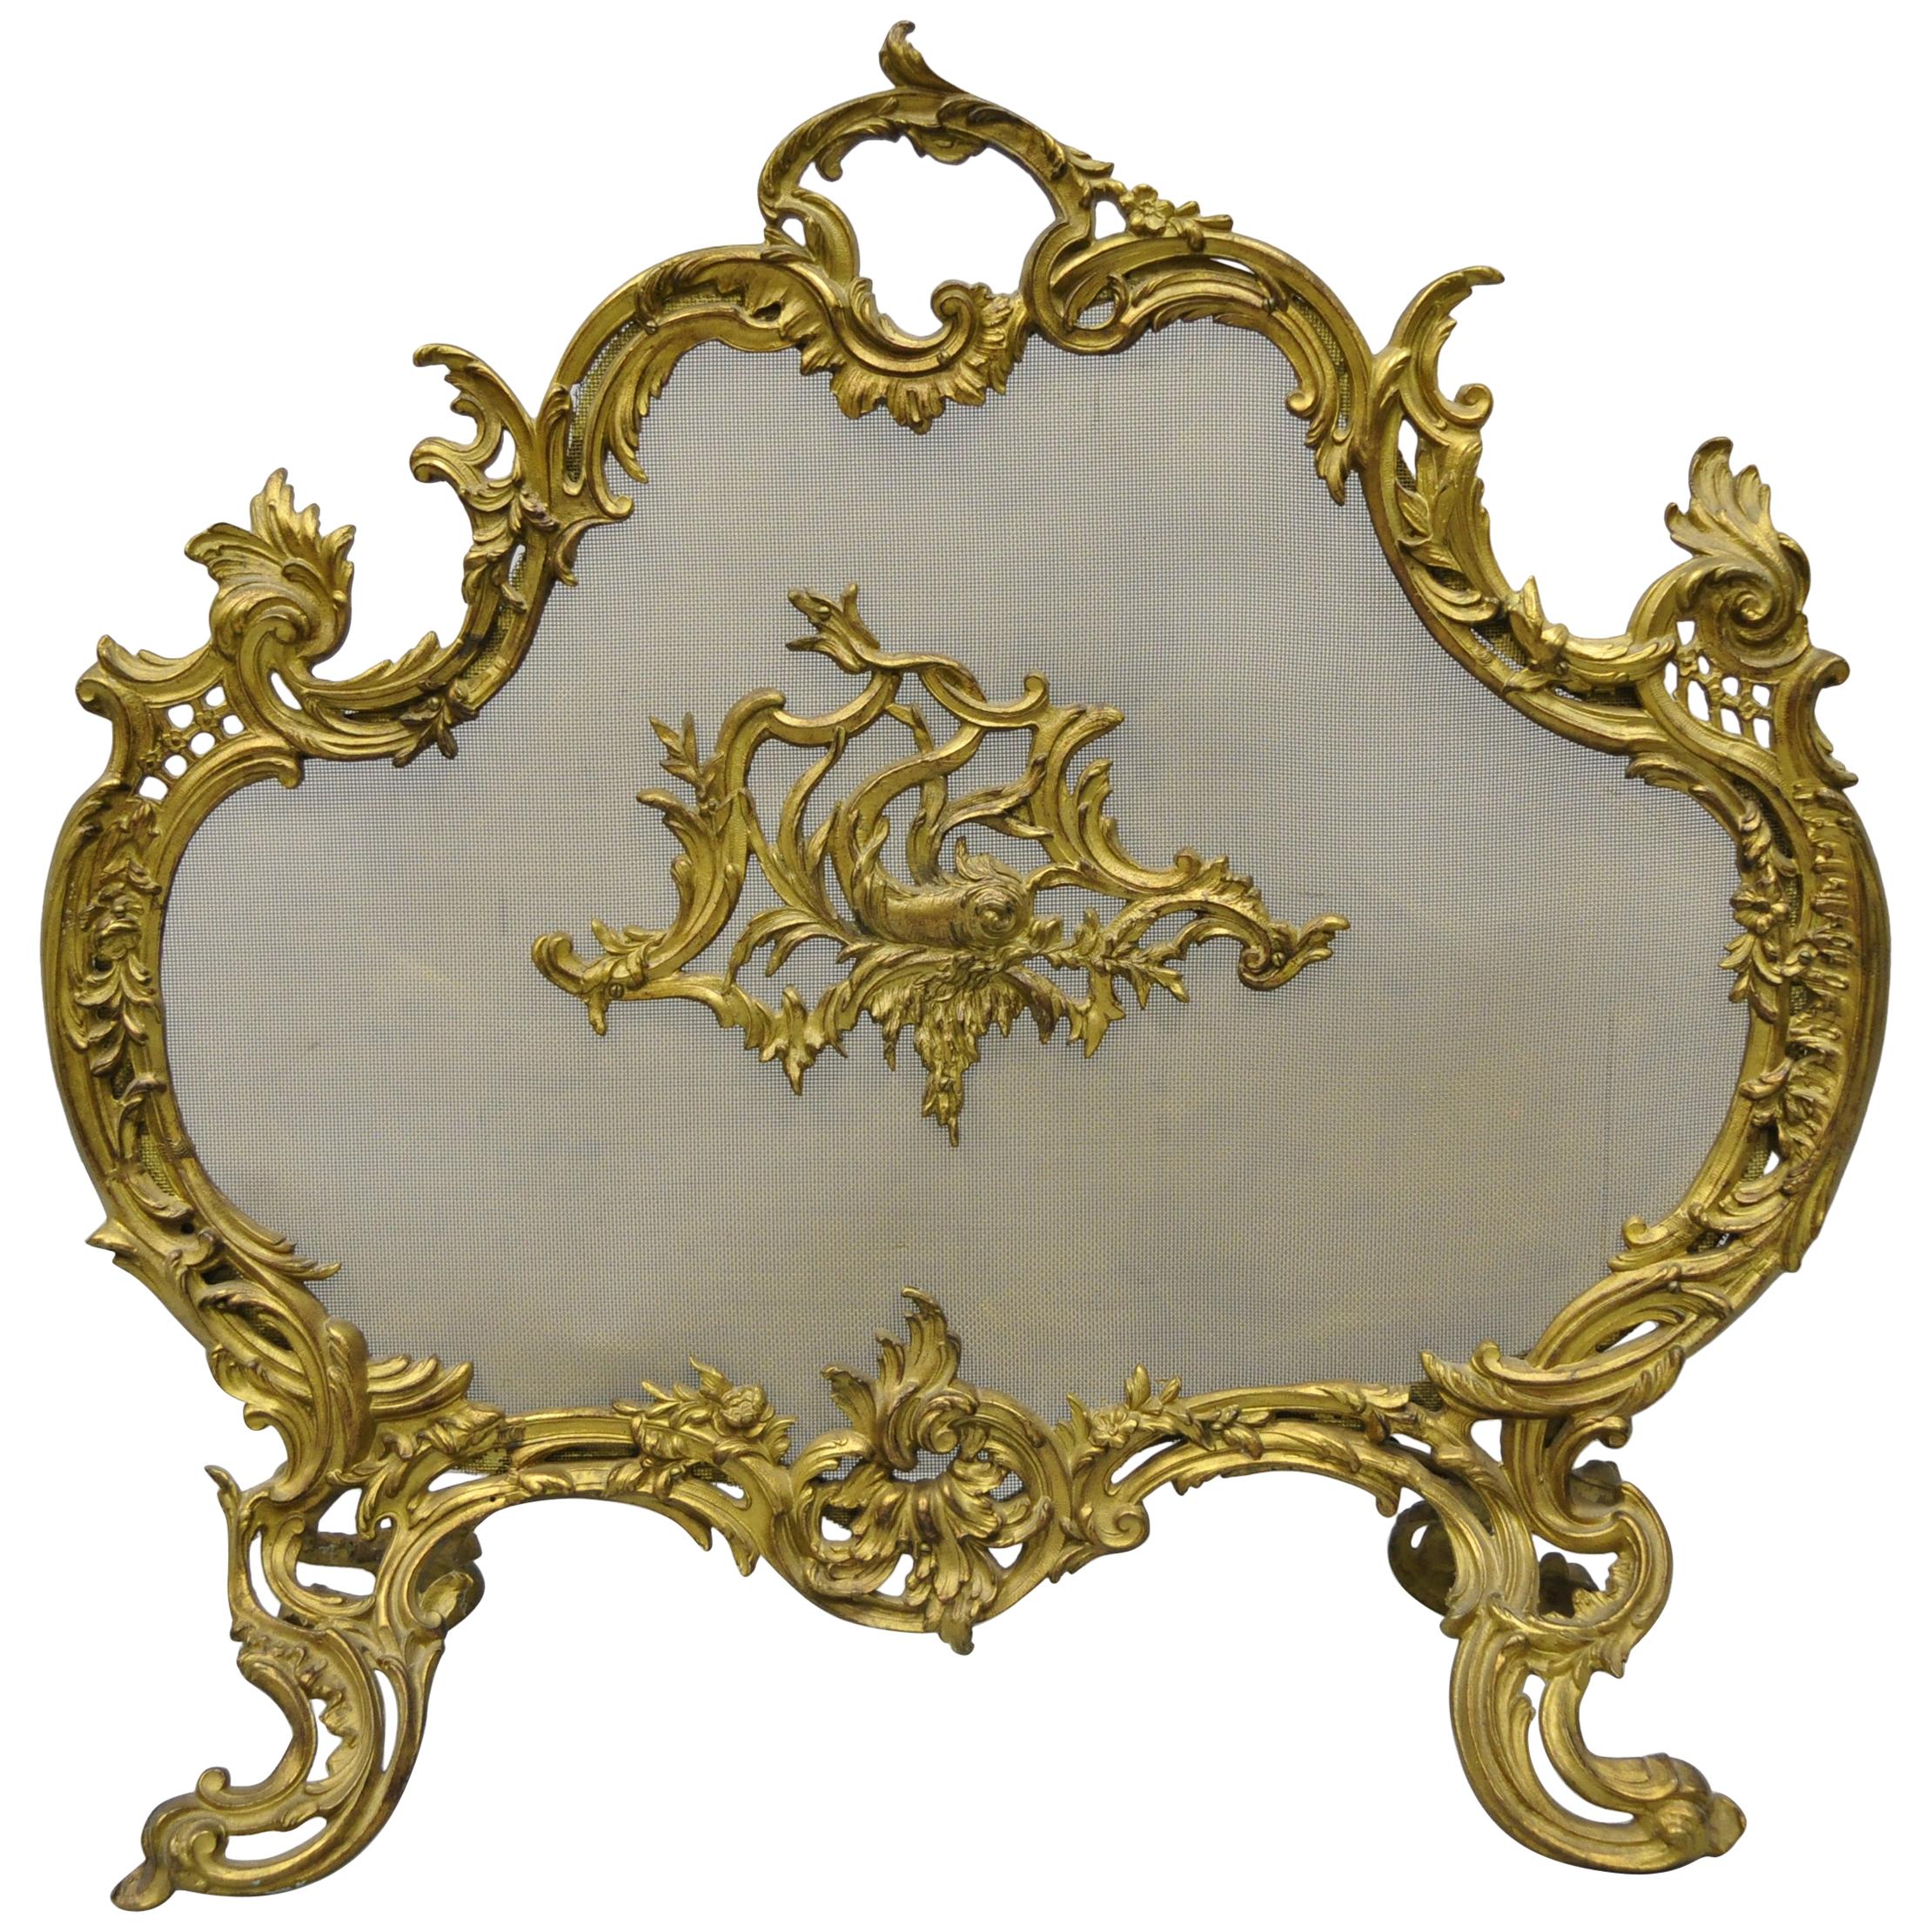 Ornate Antique French Rococo Louis XV Style Bronze Fireplace Fire Screen